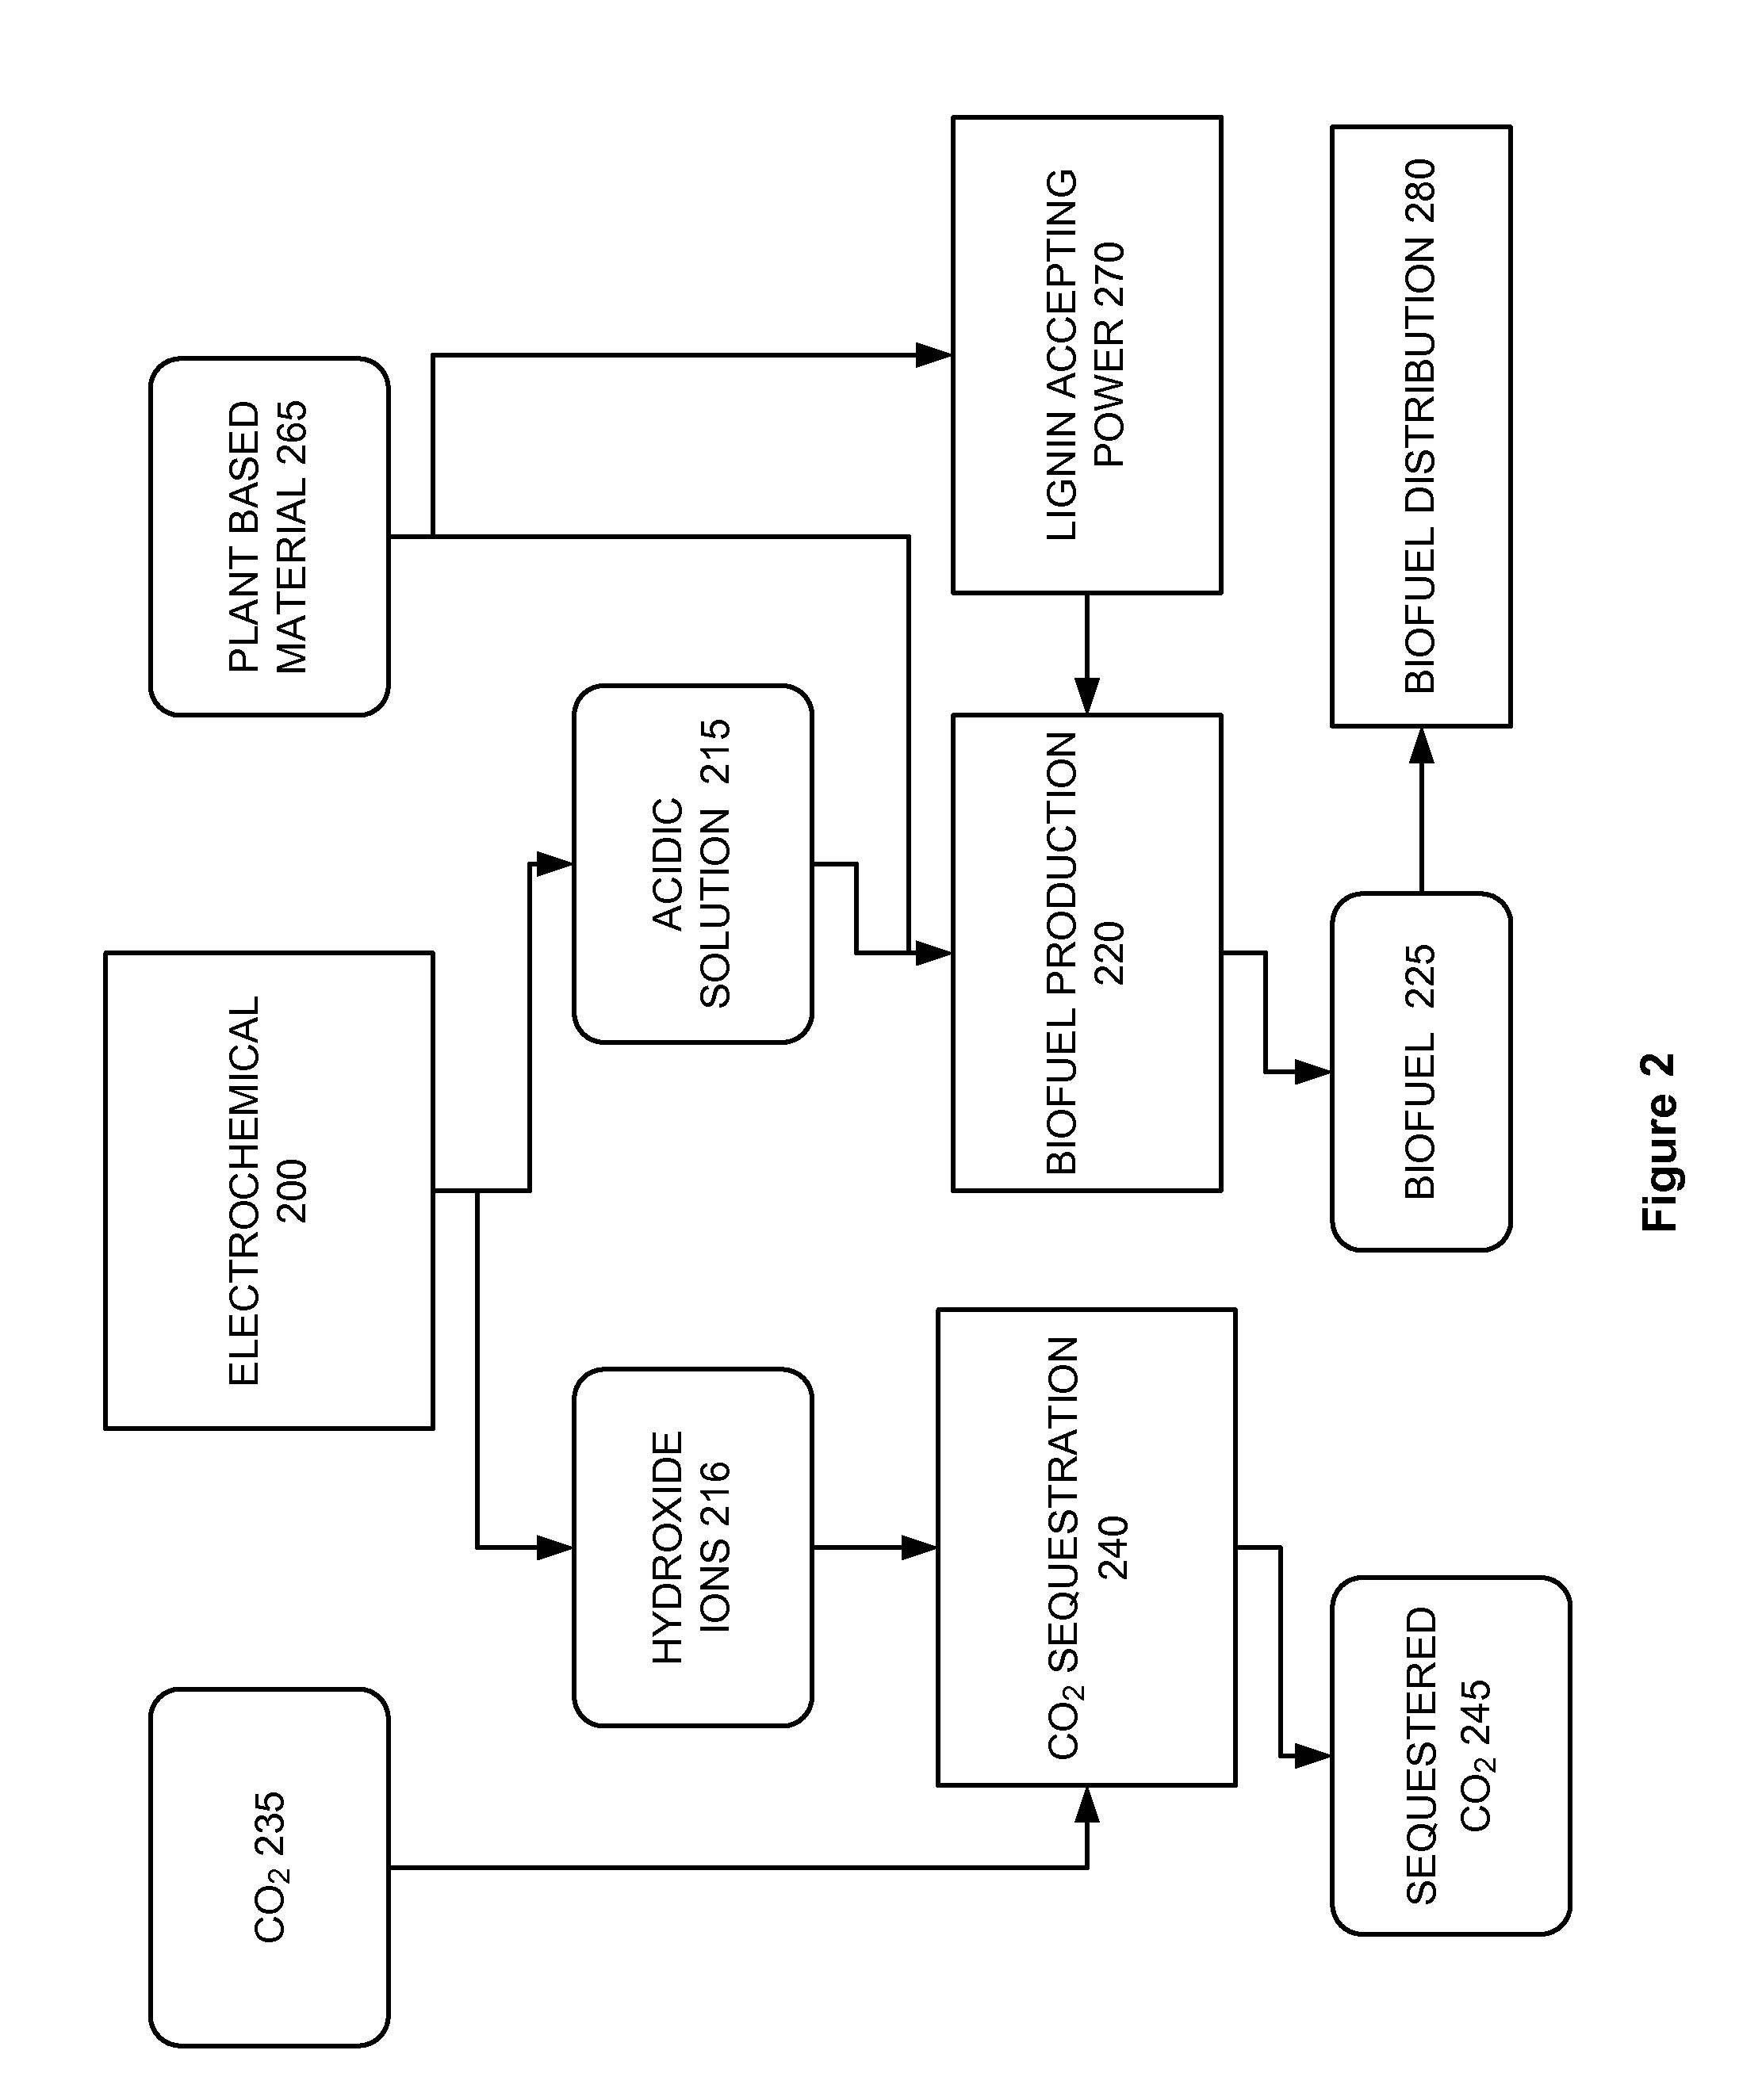 Methods and Systems for Utilization of HCI